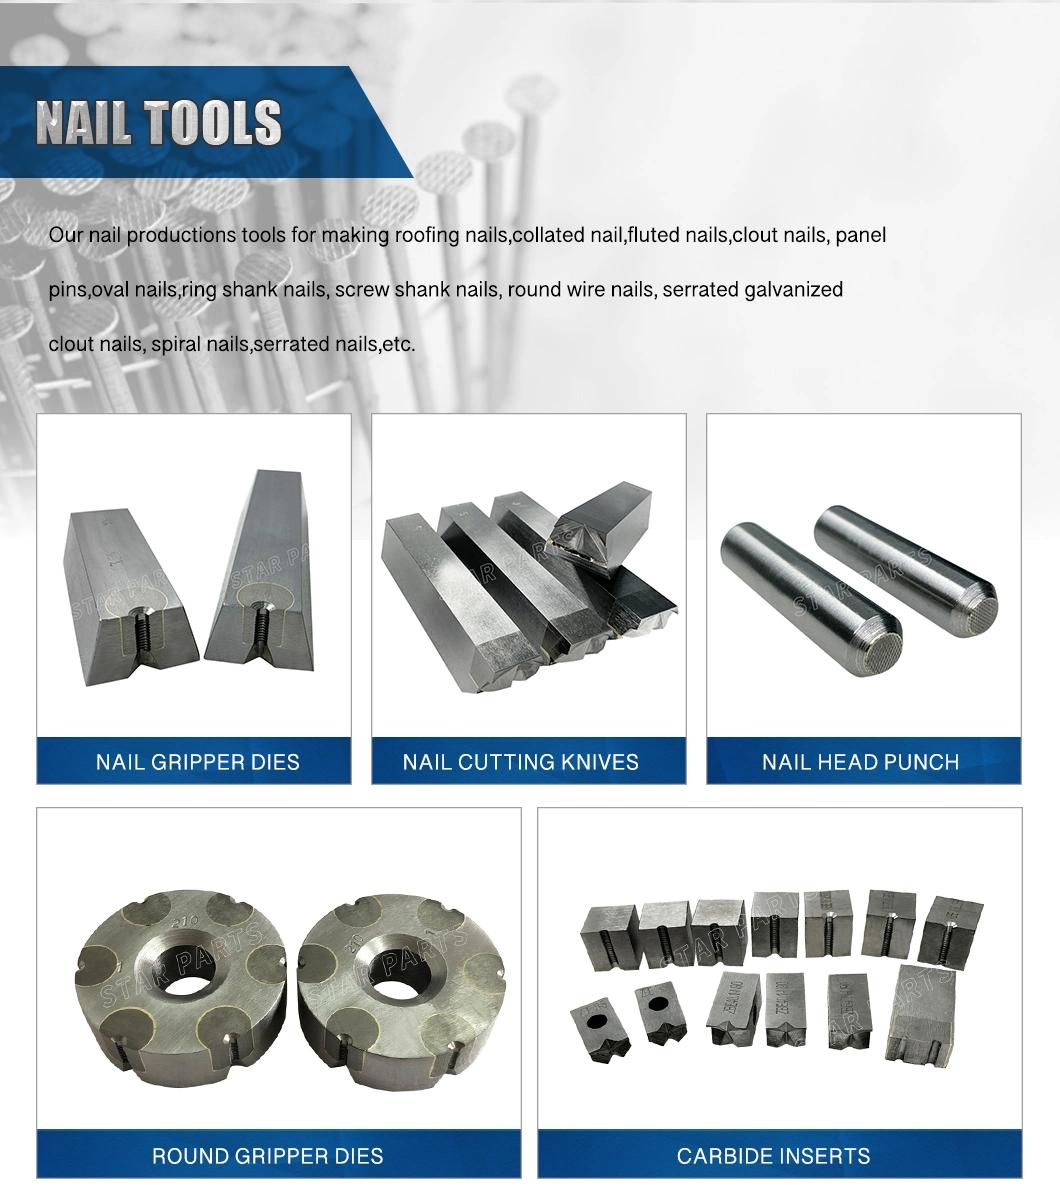 Tungsten Carbide Nail Head Punches Used to Wire Nail Industry